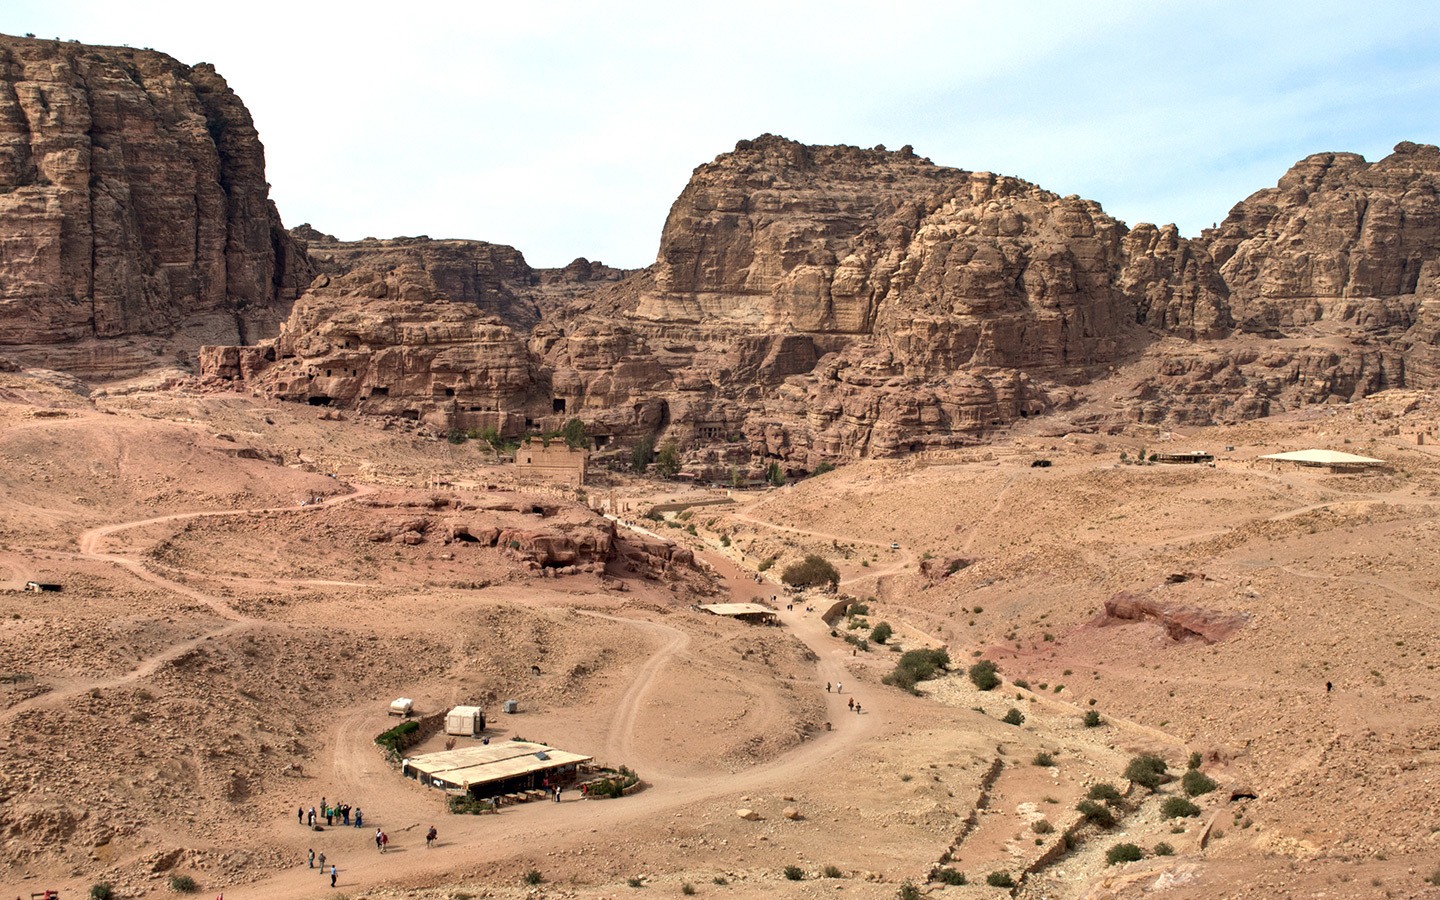 Views from the Urn Tomb when visiting Petra